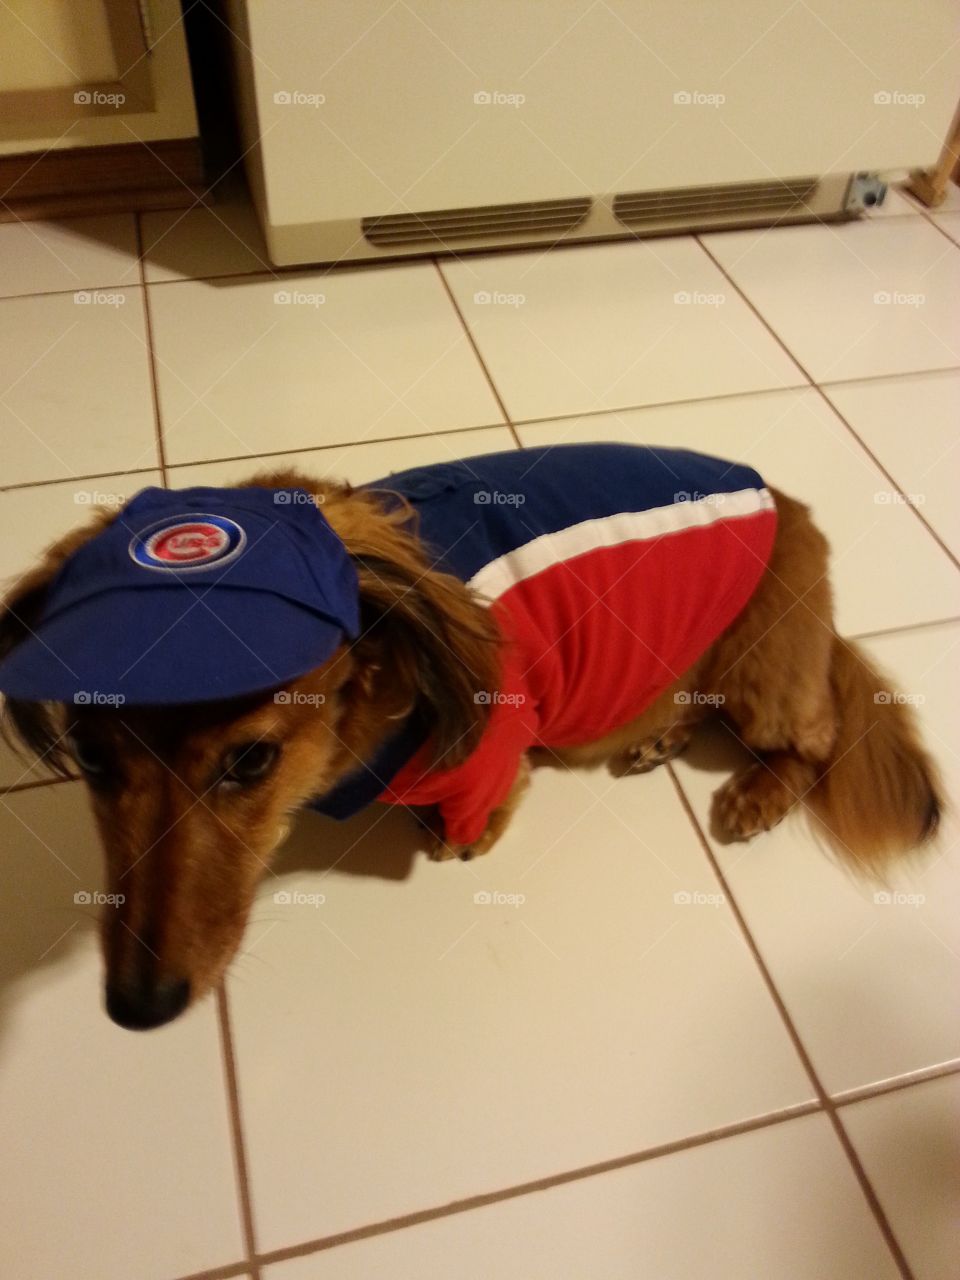 Frank wishing cubs luck in playoffs